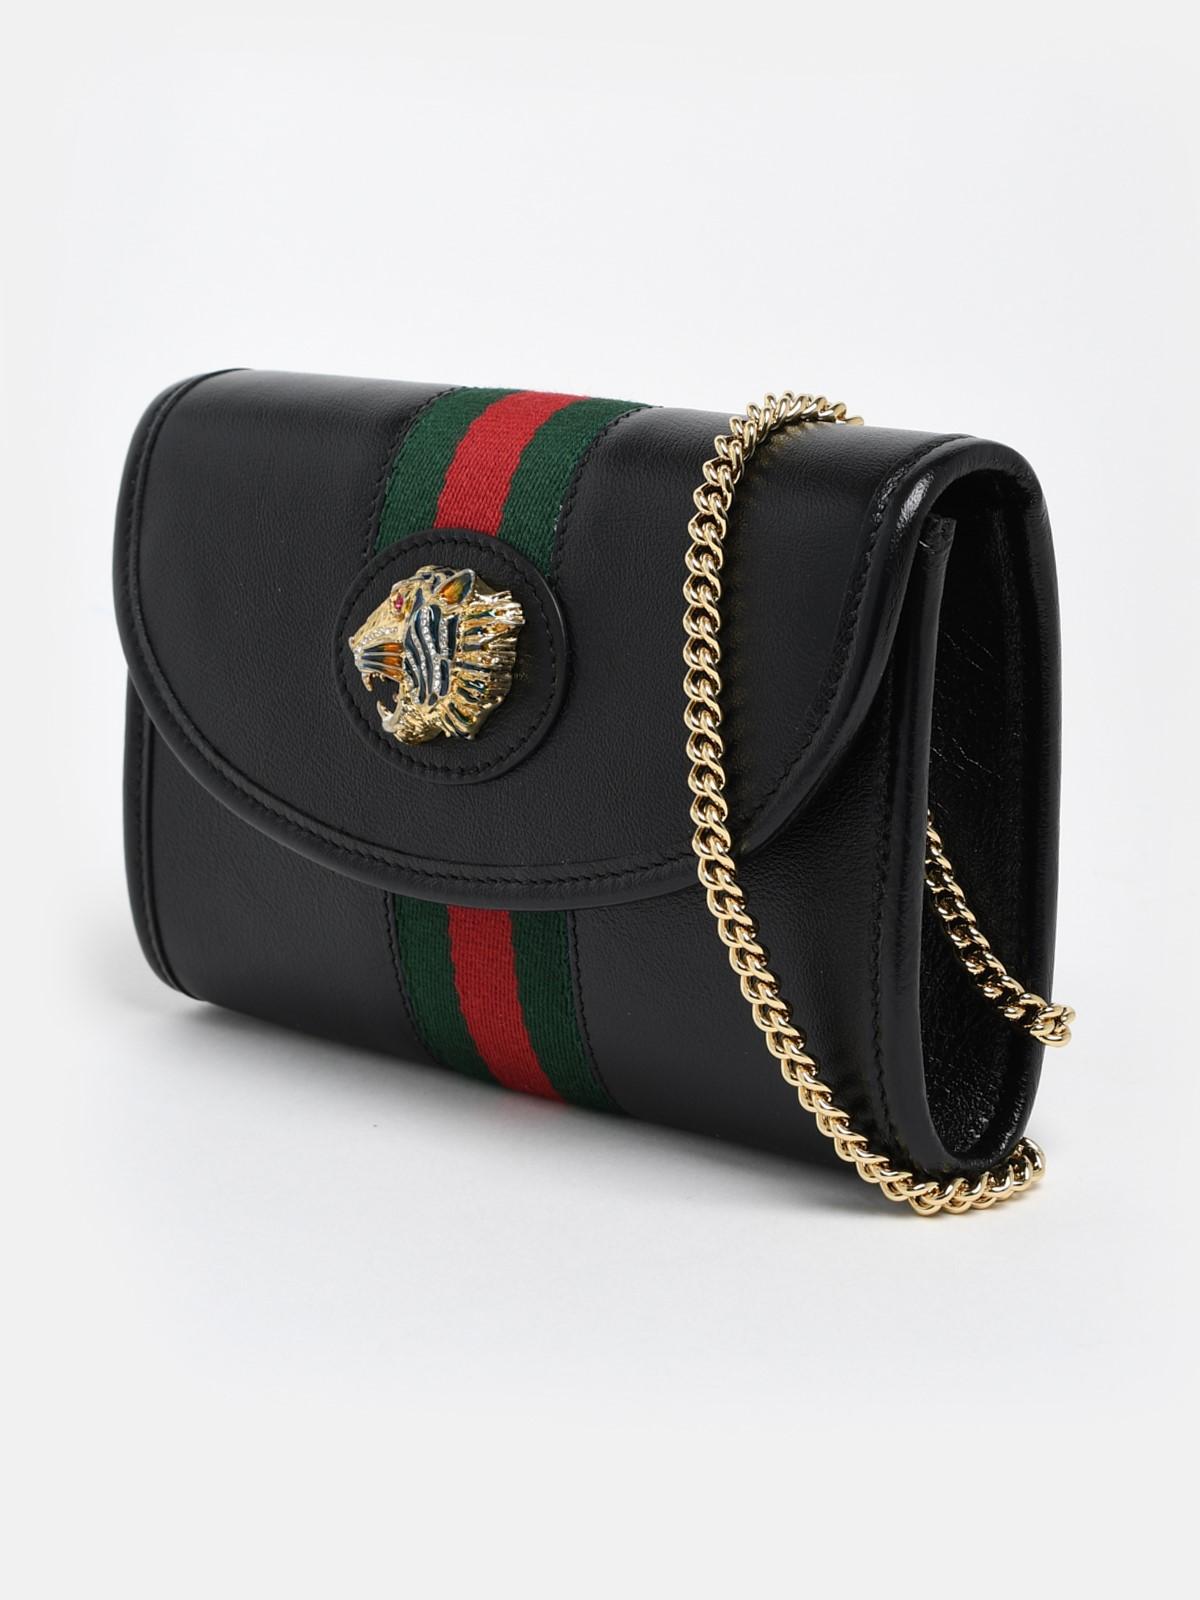 Gucci 101: The Dionysus Collection - The Vault